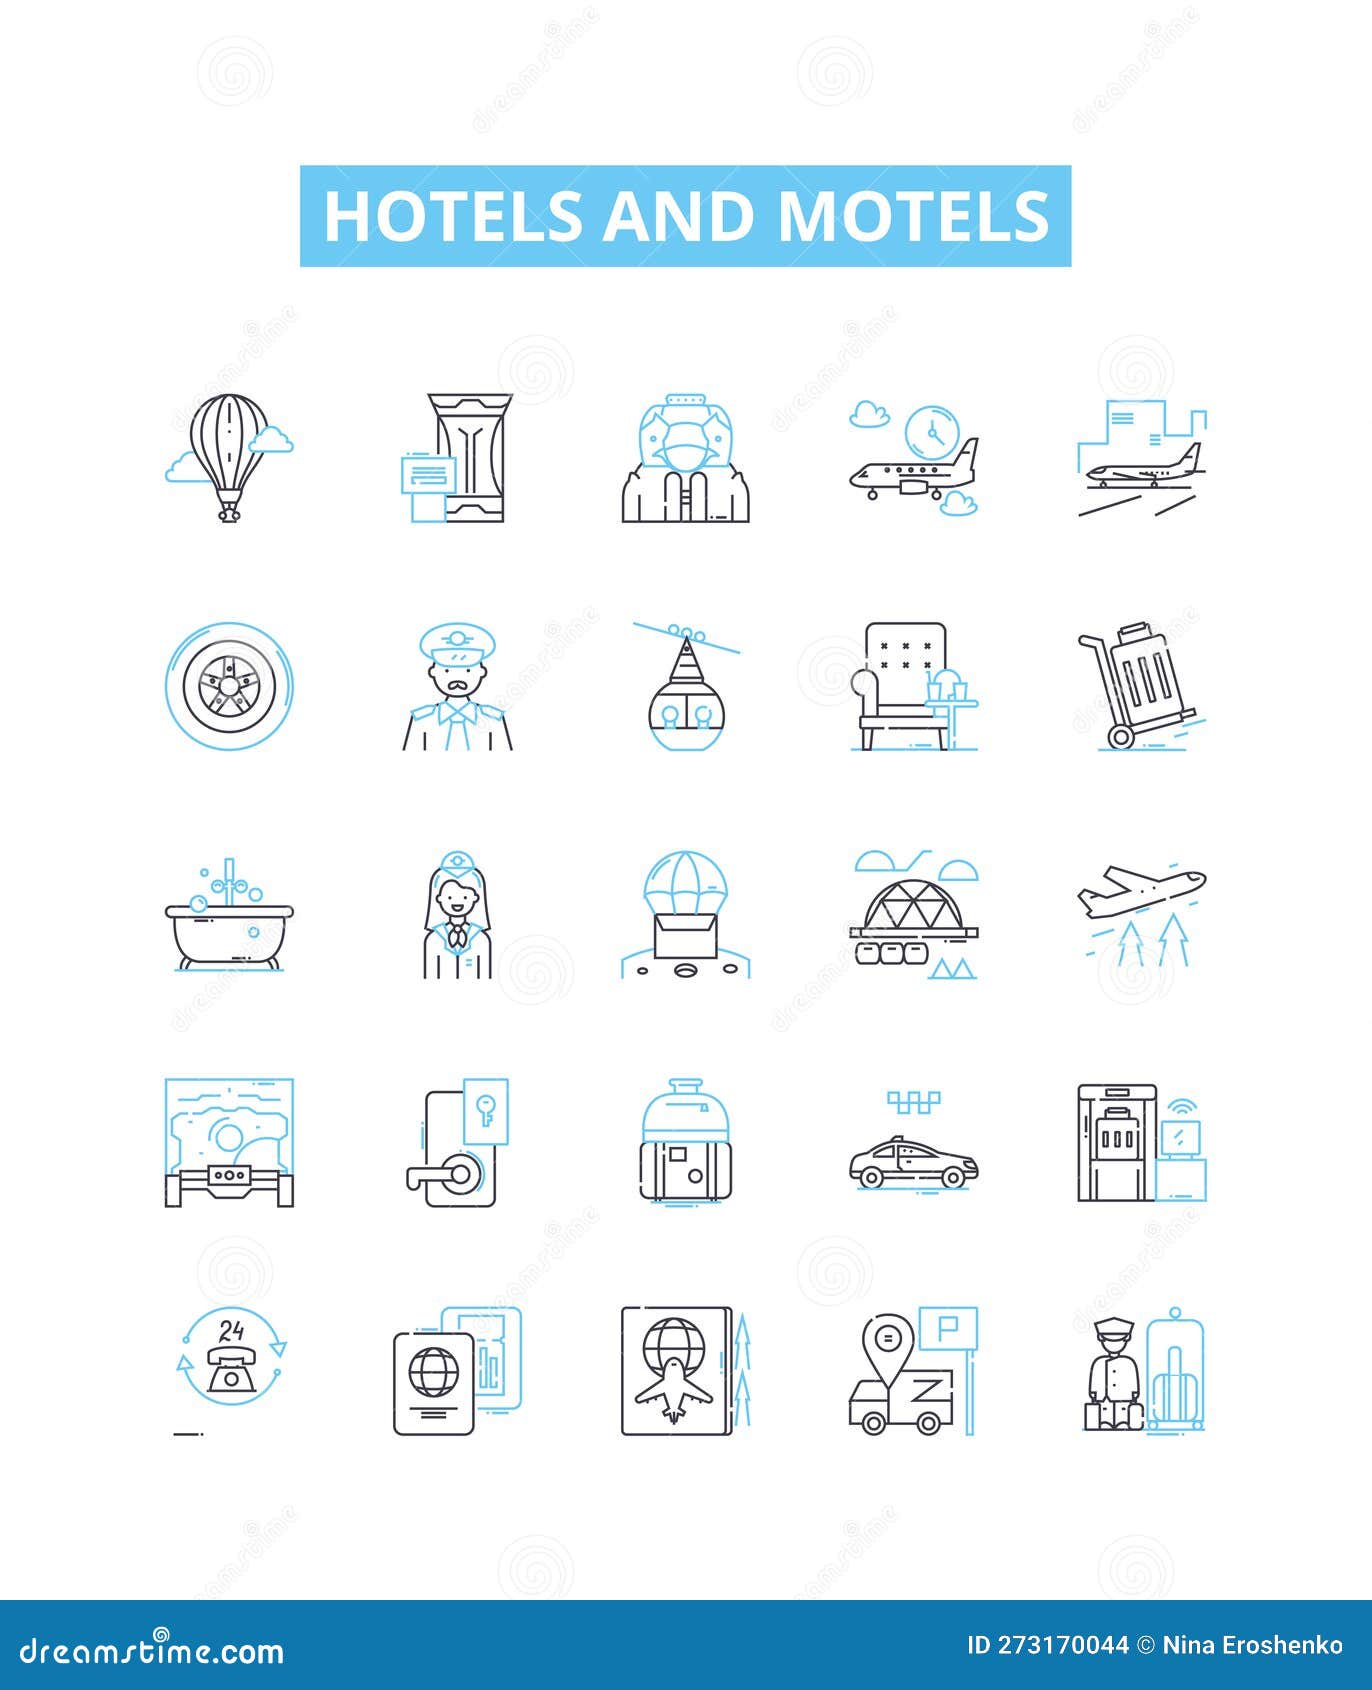 hotels and motels  line icons set. lodgings, accommodations, inns, resorts, suites, motels, hostels 